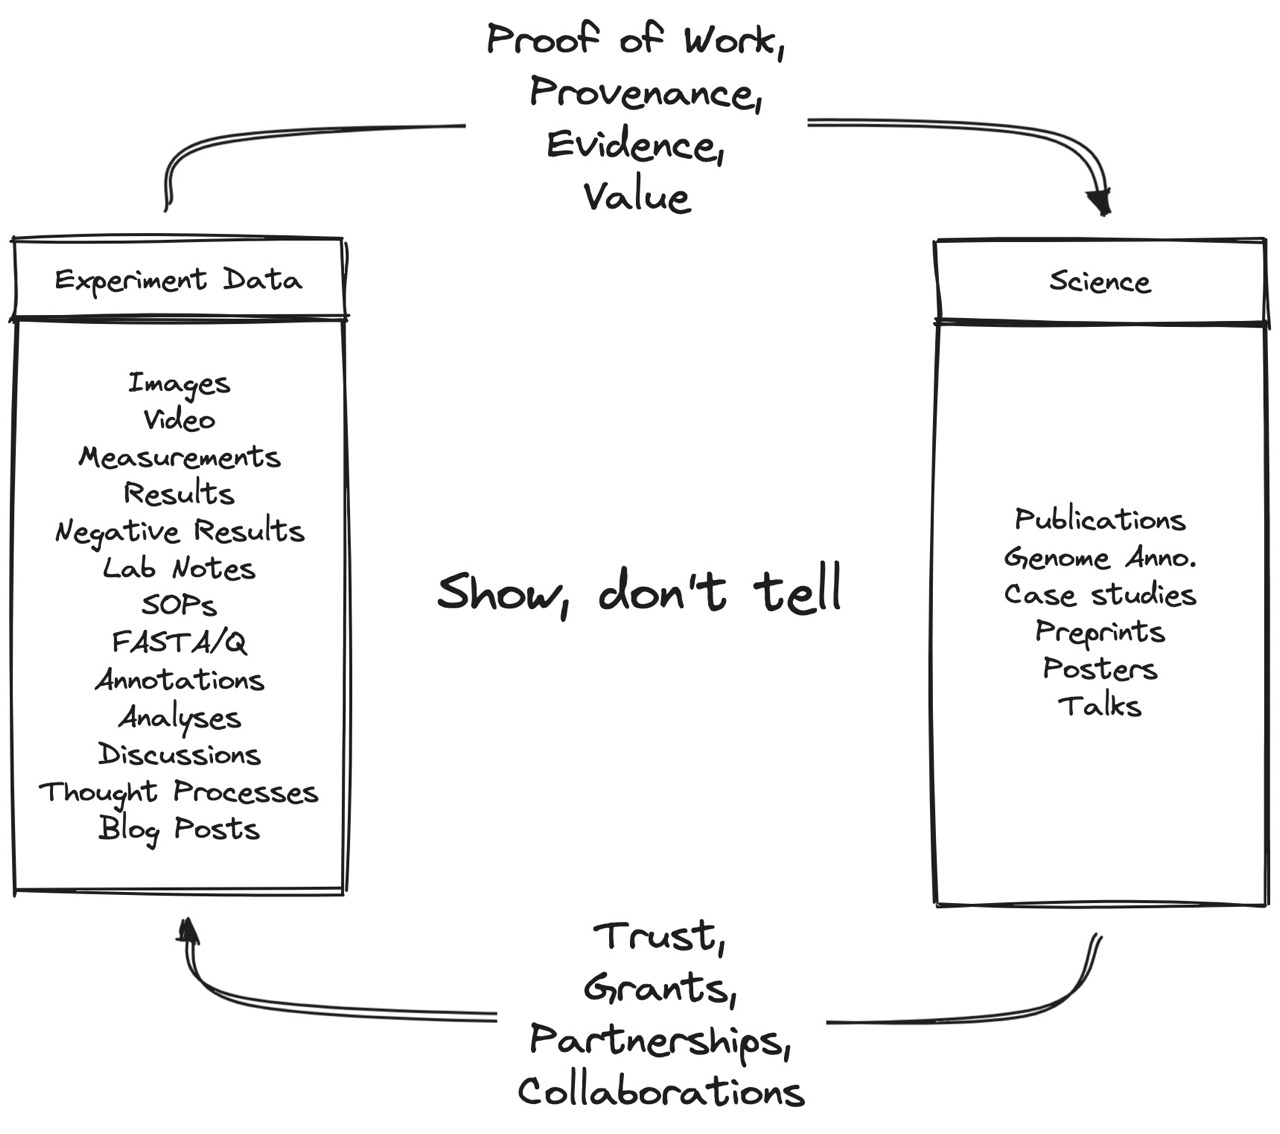 Fig 1. Show, don’t tell. Experiments generate data, which backs up the science with evidence. Good science backed up by evidence leads to higher trust, more grants, partnerships, and better collaborations. Inspired by @jackbutcher’s “Sell your Sawdust” thread.